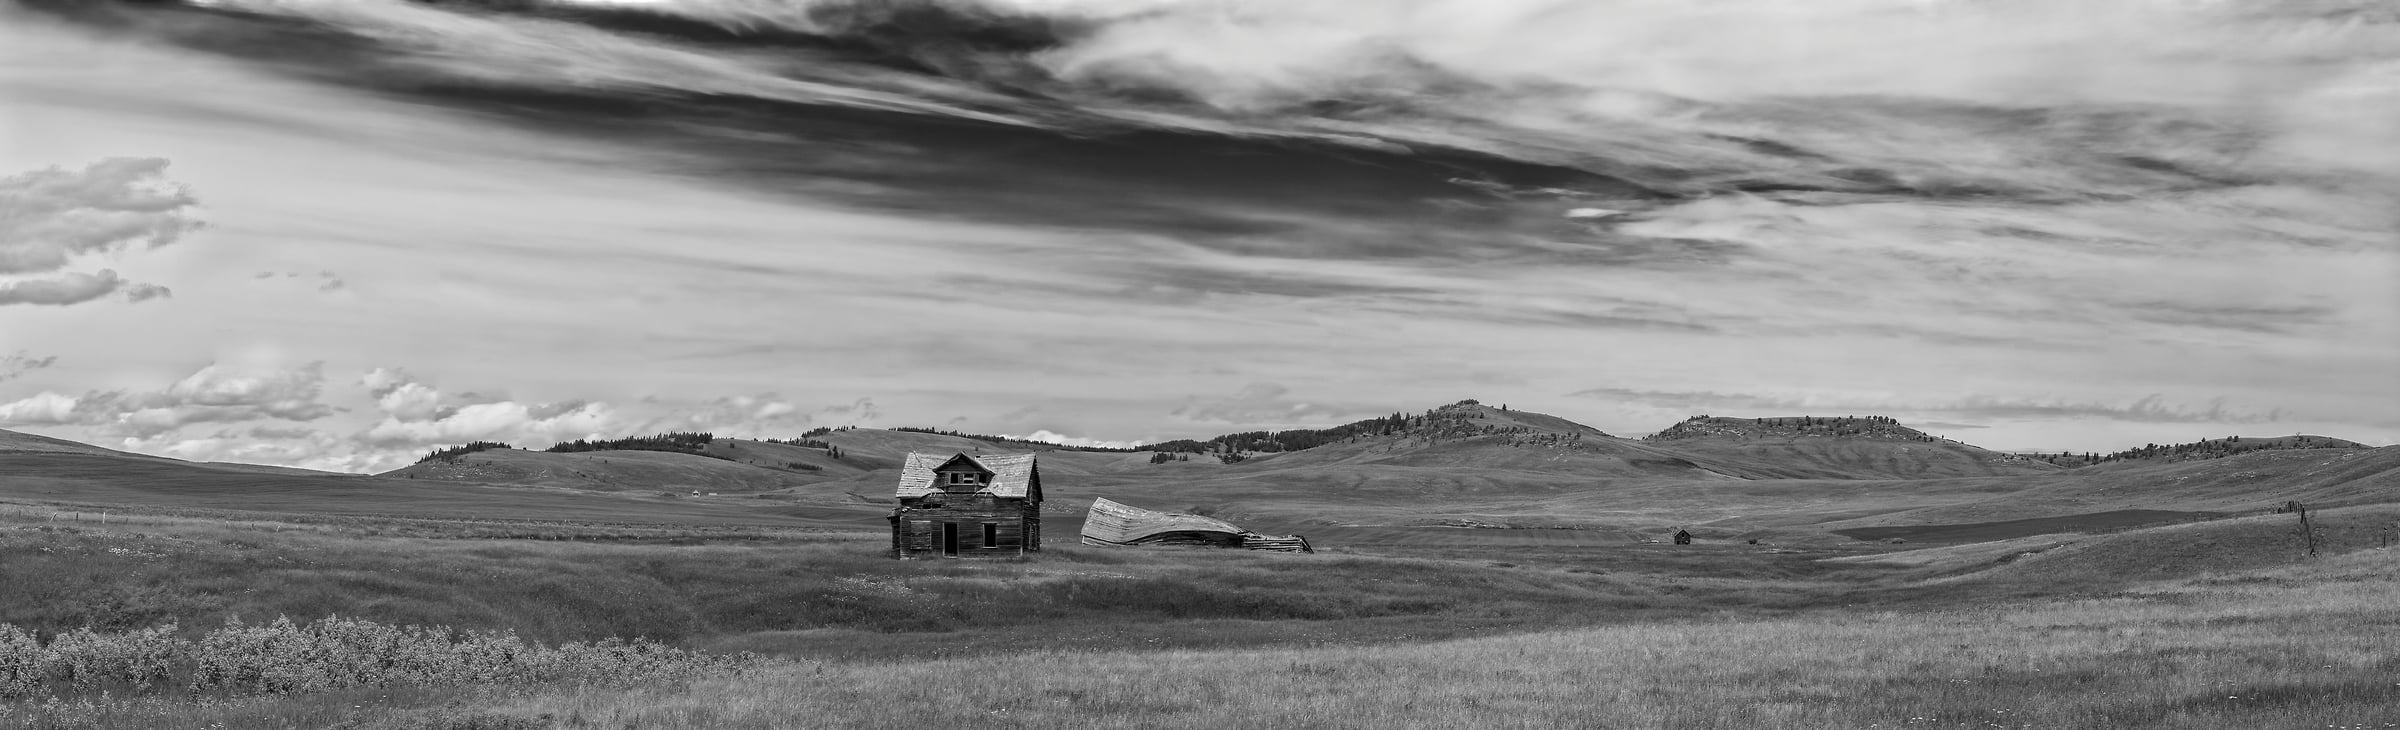 232 megapixels! A very high resolution, large-format VAST photo print of a homestead; black & white landscape photograph created by Scott Dimond in Pincher Creek No. 9, Alberta, Canada